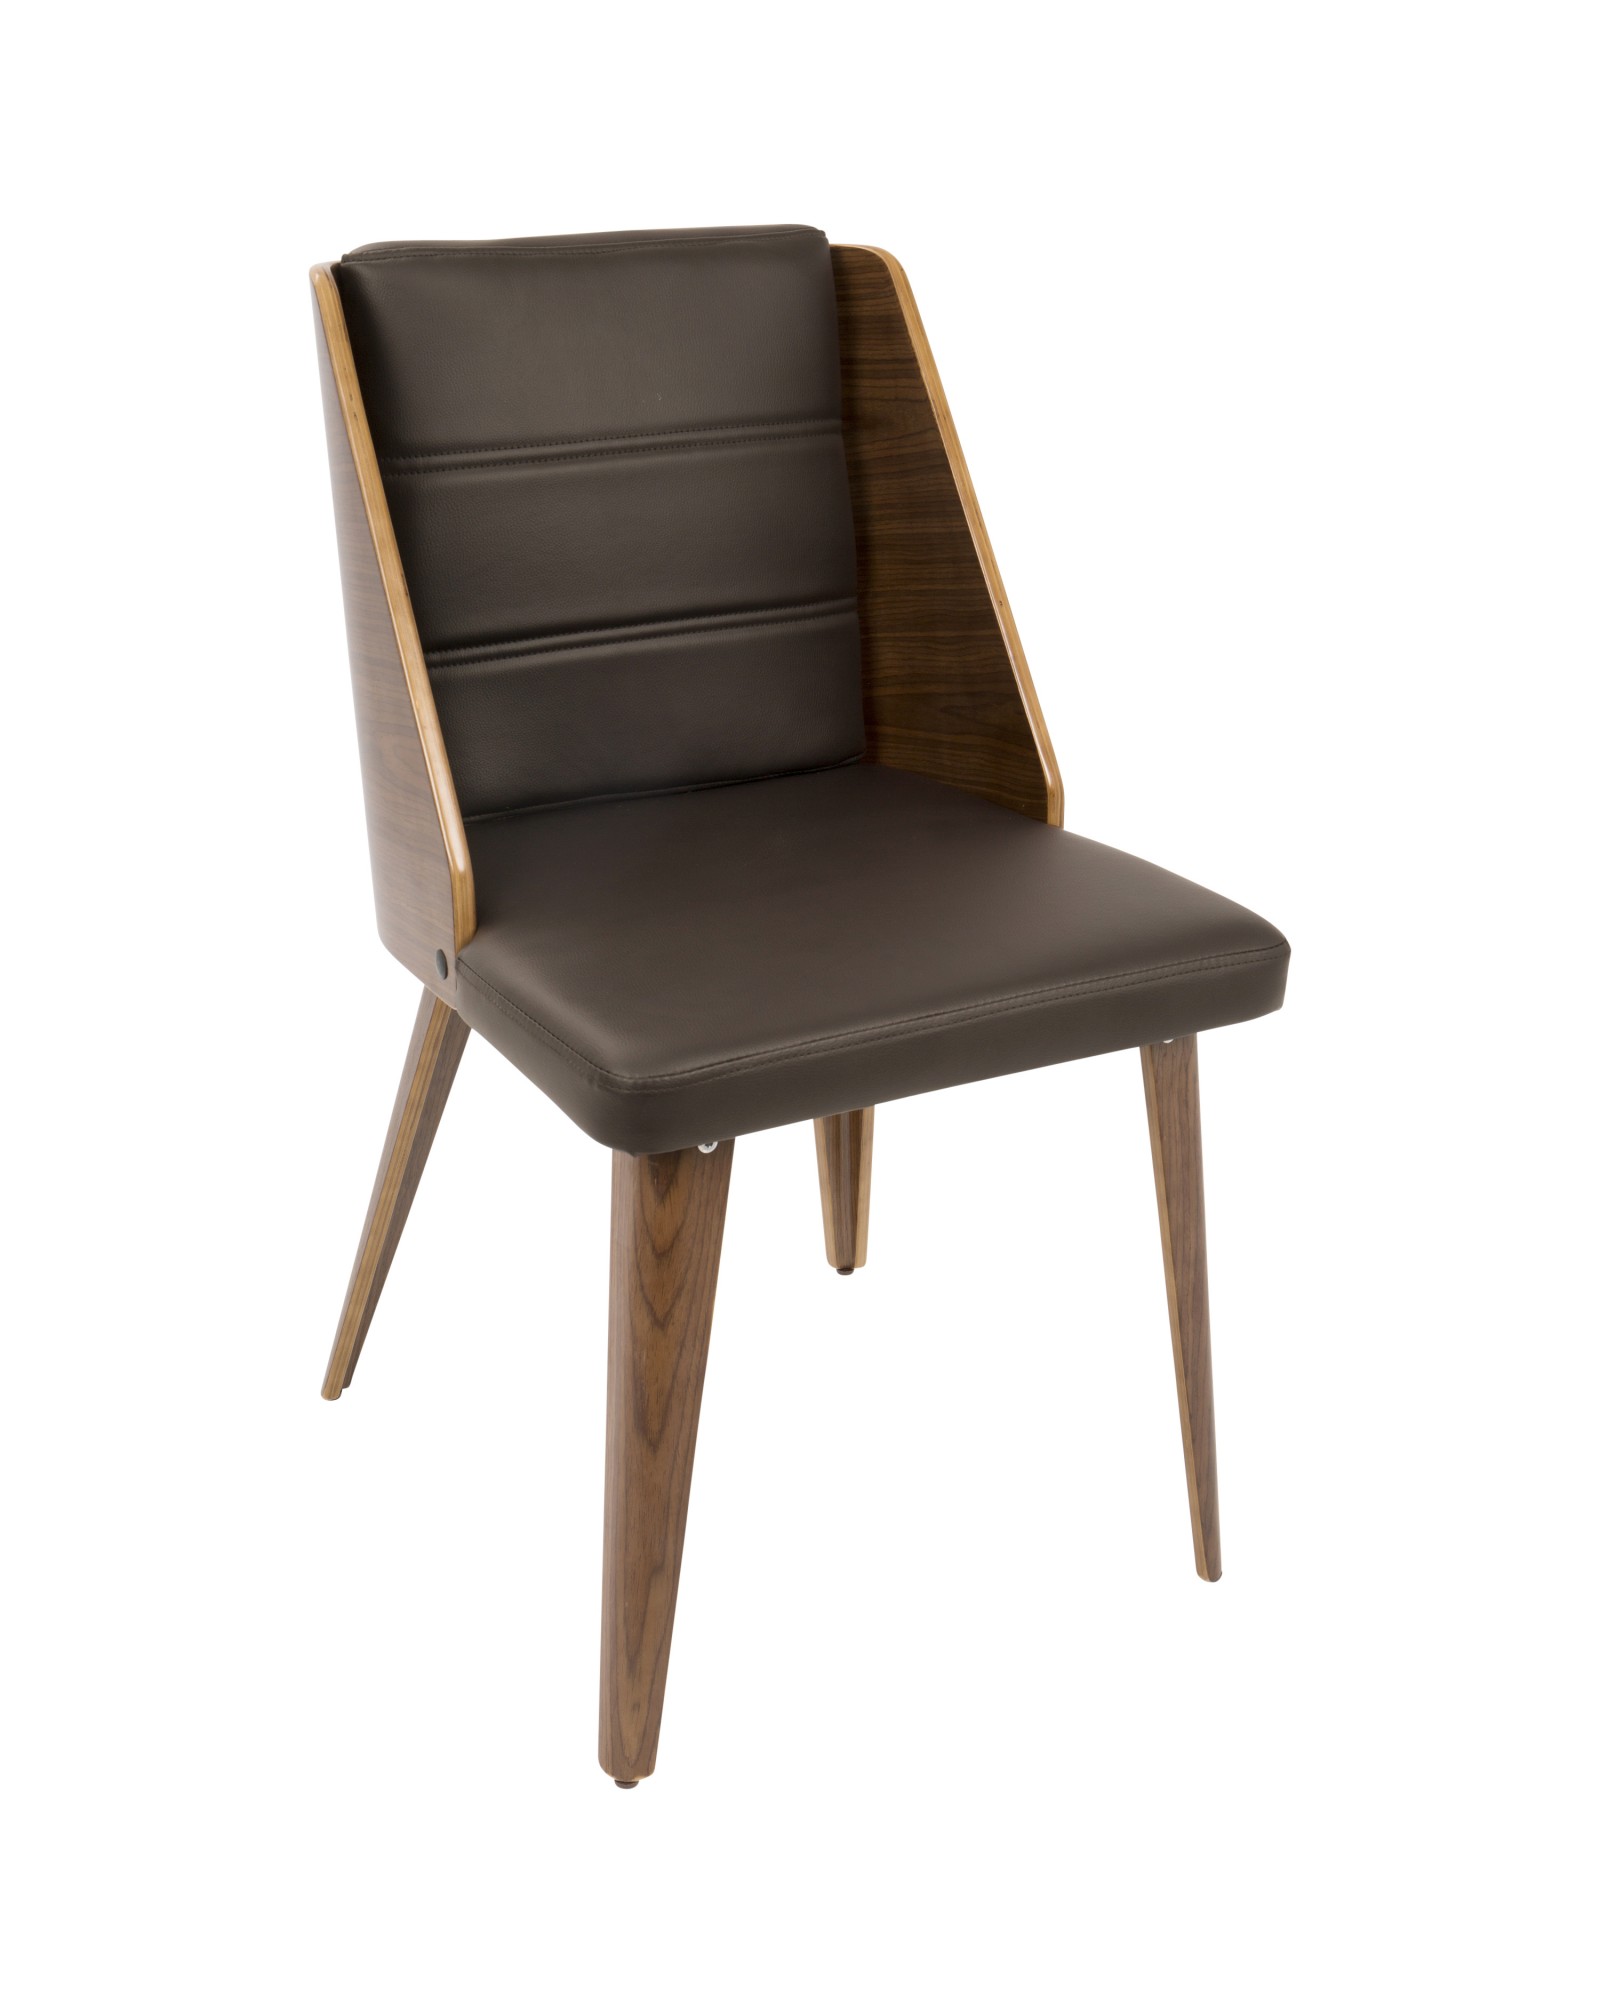 Galanti Mid-Century Modern Dining/Accent Chair in Walnut Wood and Brown Faux Leather - Set of 2